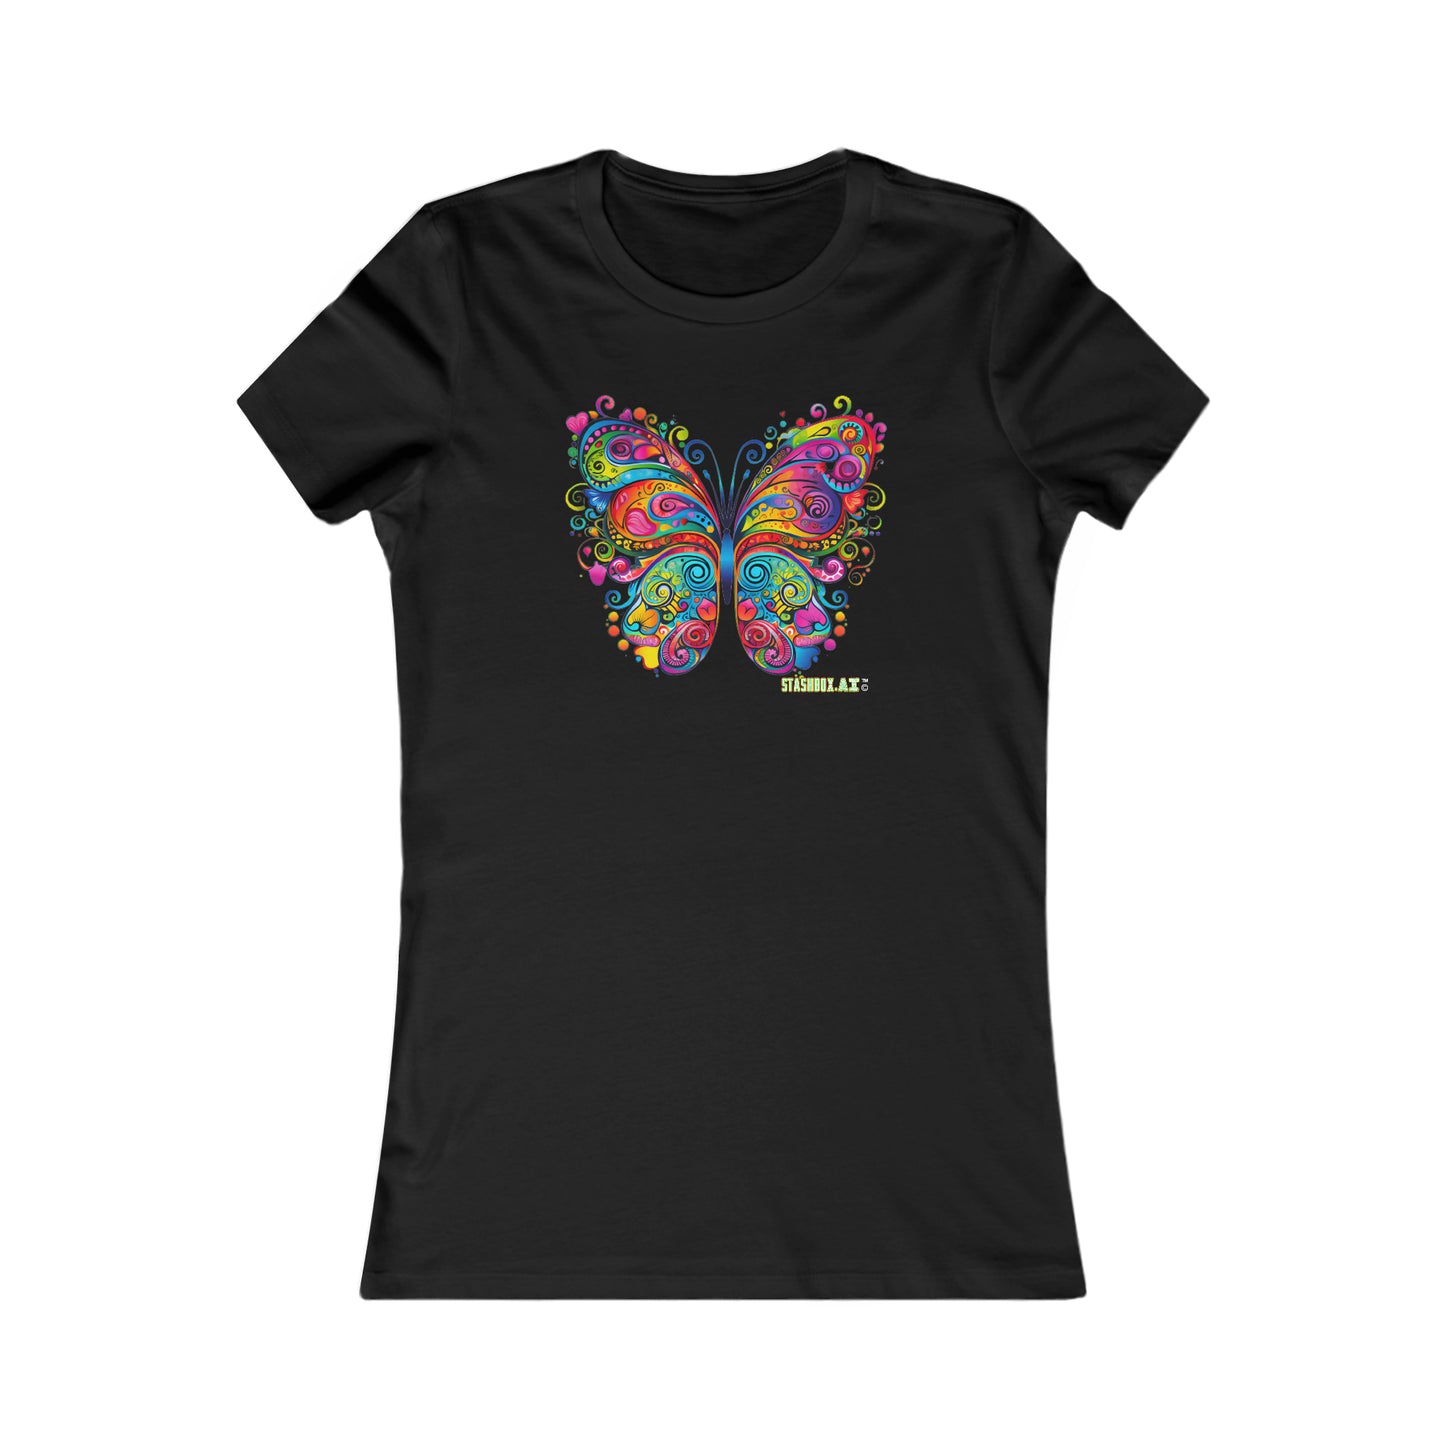 Women's Favorite T-Shirt Colorful Butterfly Design 007